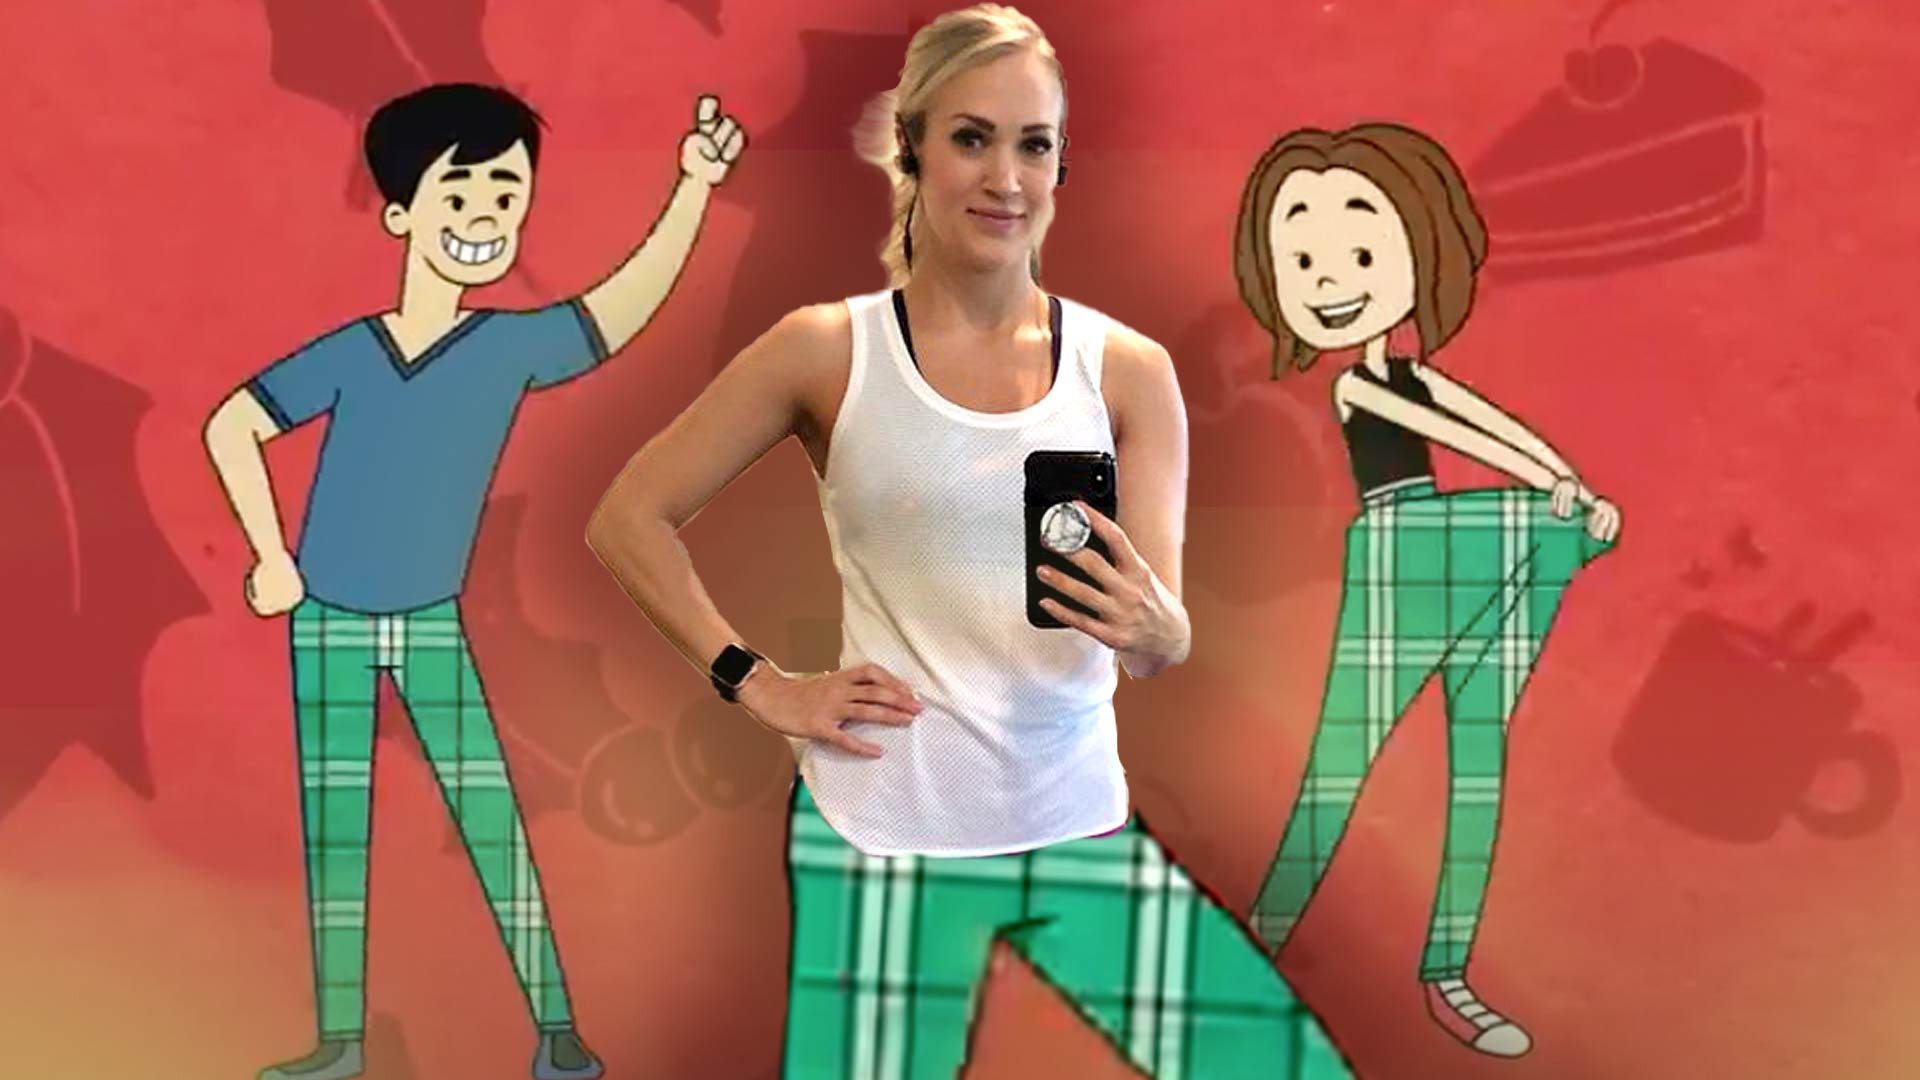 Carrie Underwood Stretchy Pants Music Video